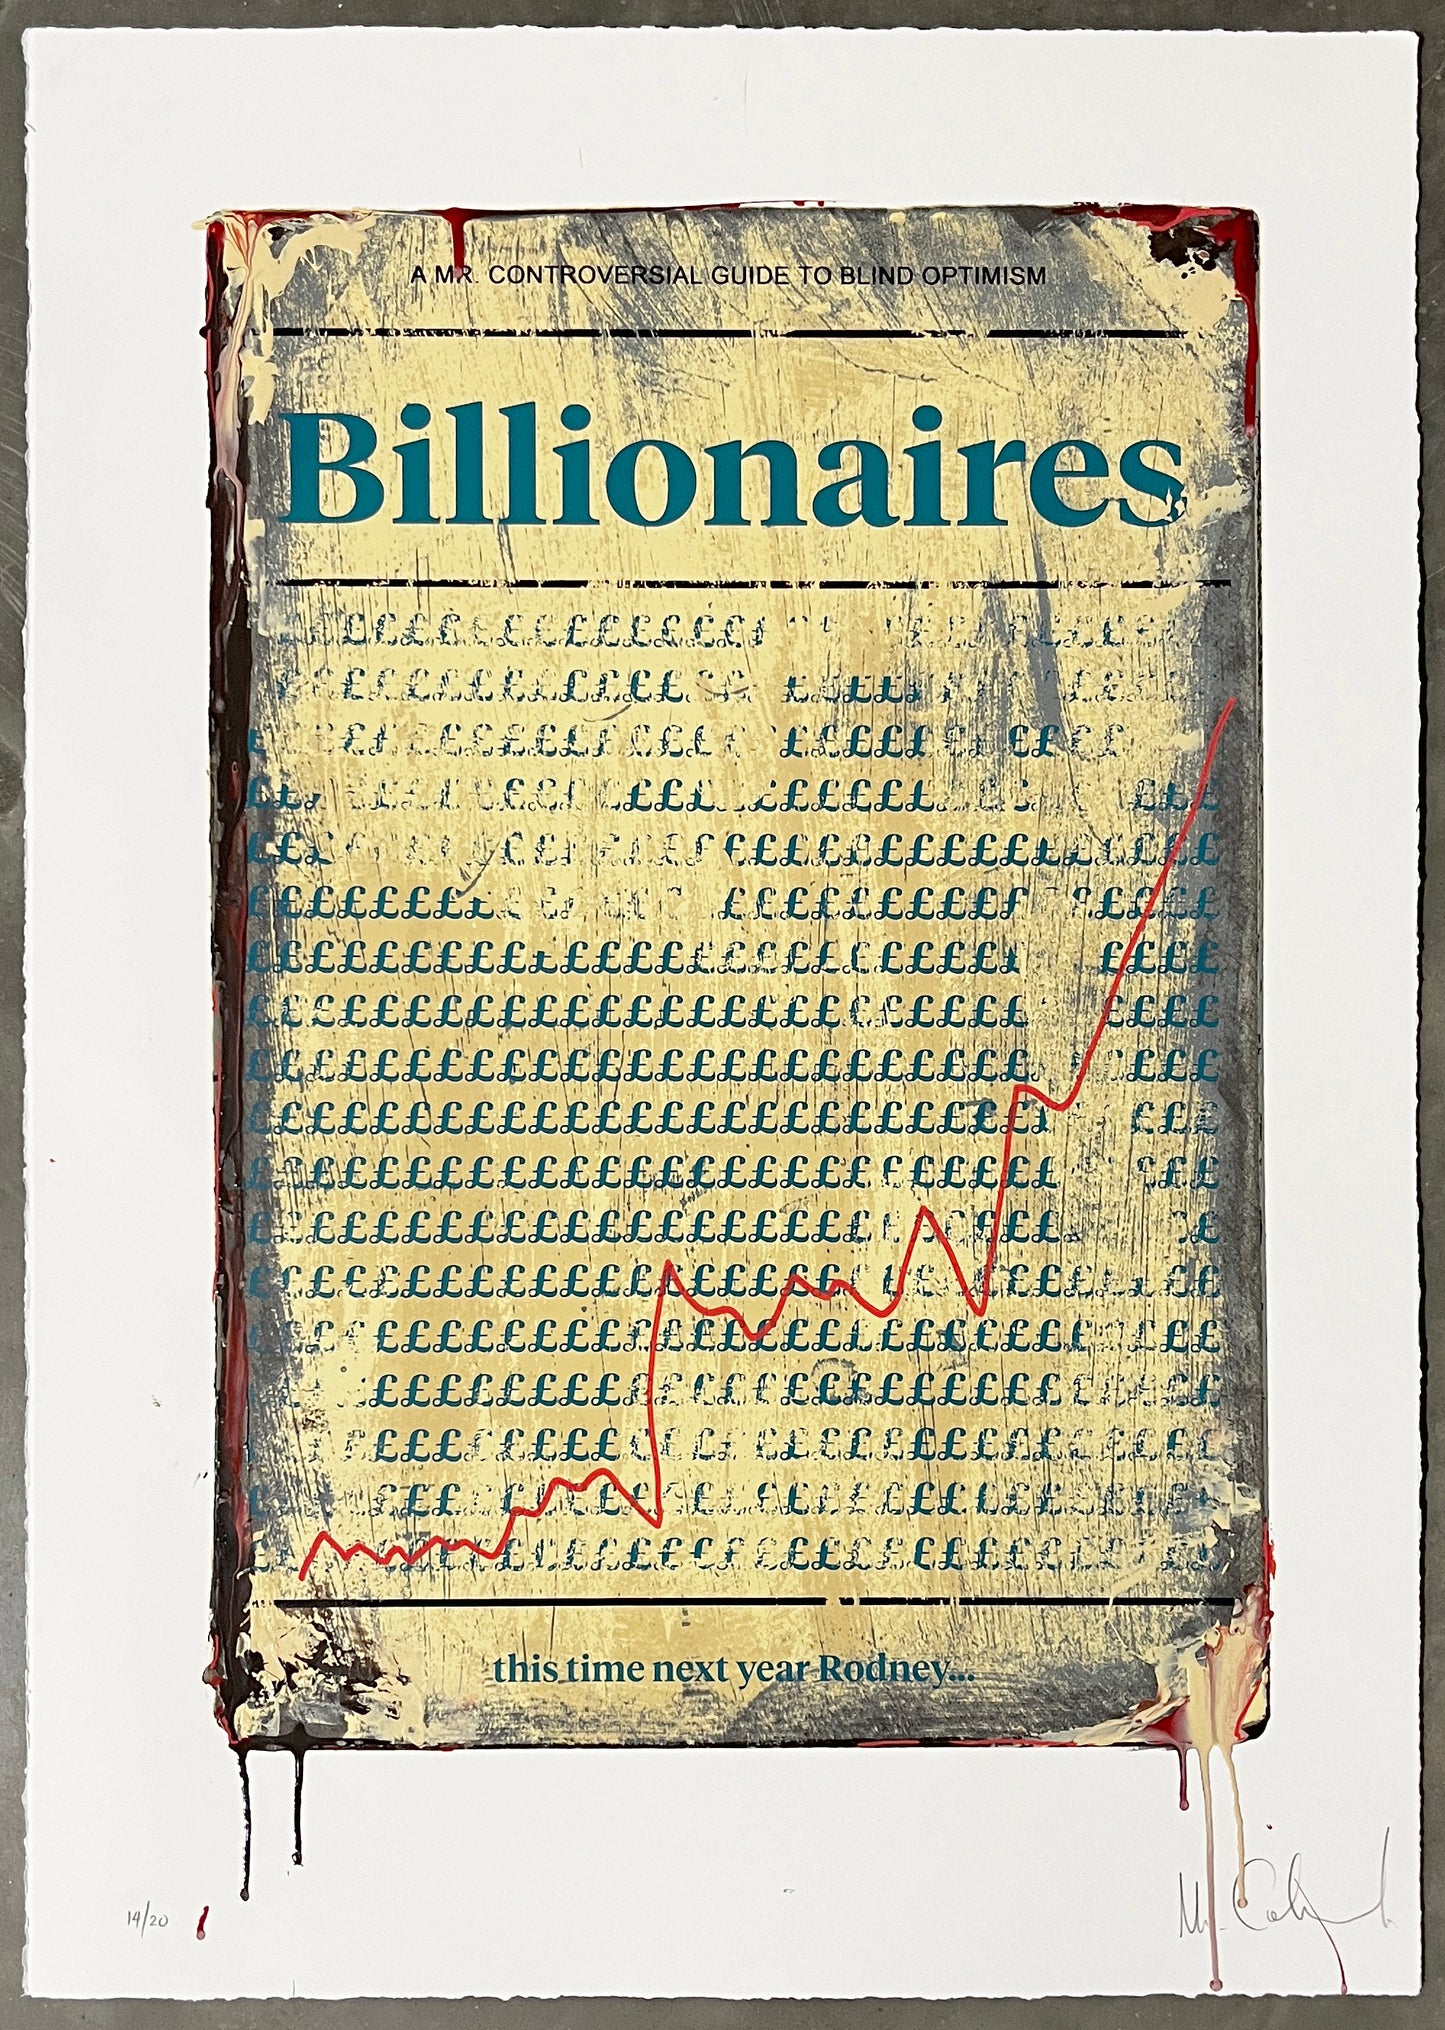 Mr Controversial, Artist, Billionaires, Edition 14, Hand-finished limited edition, TAP Galleries, Essex Chelmsford Art Gallery